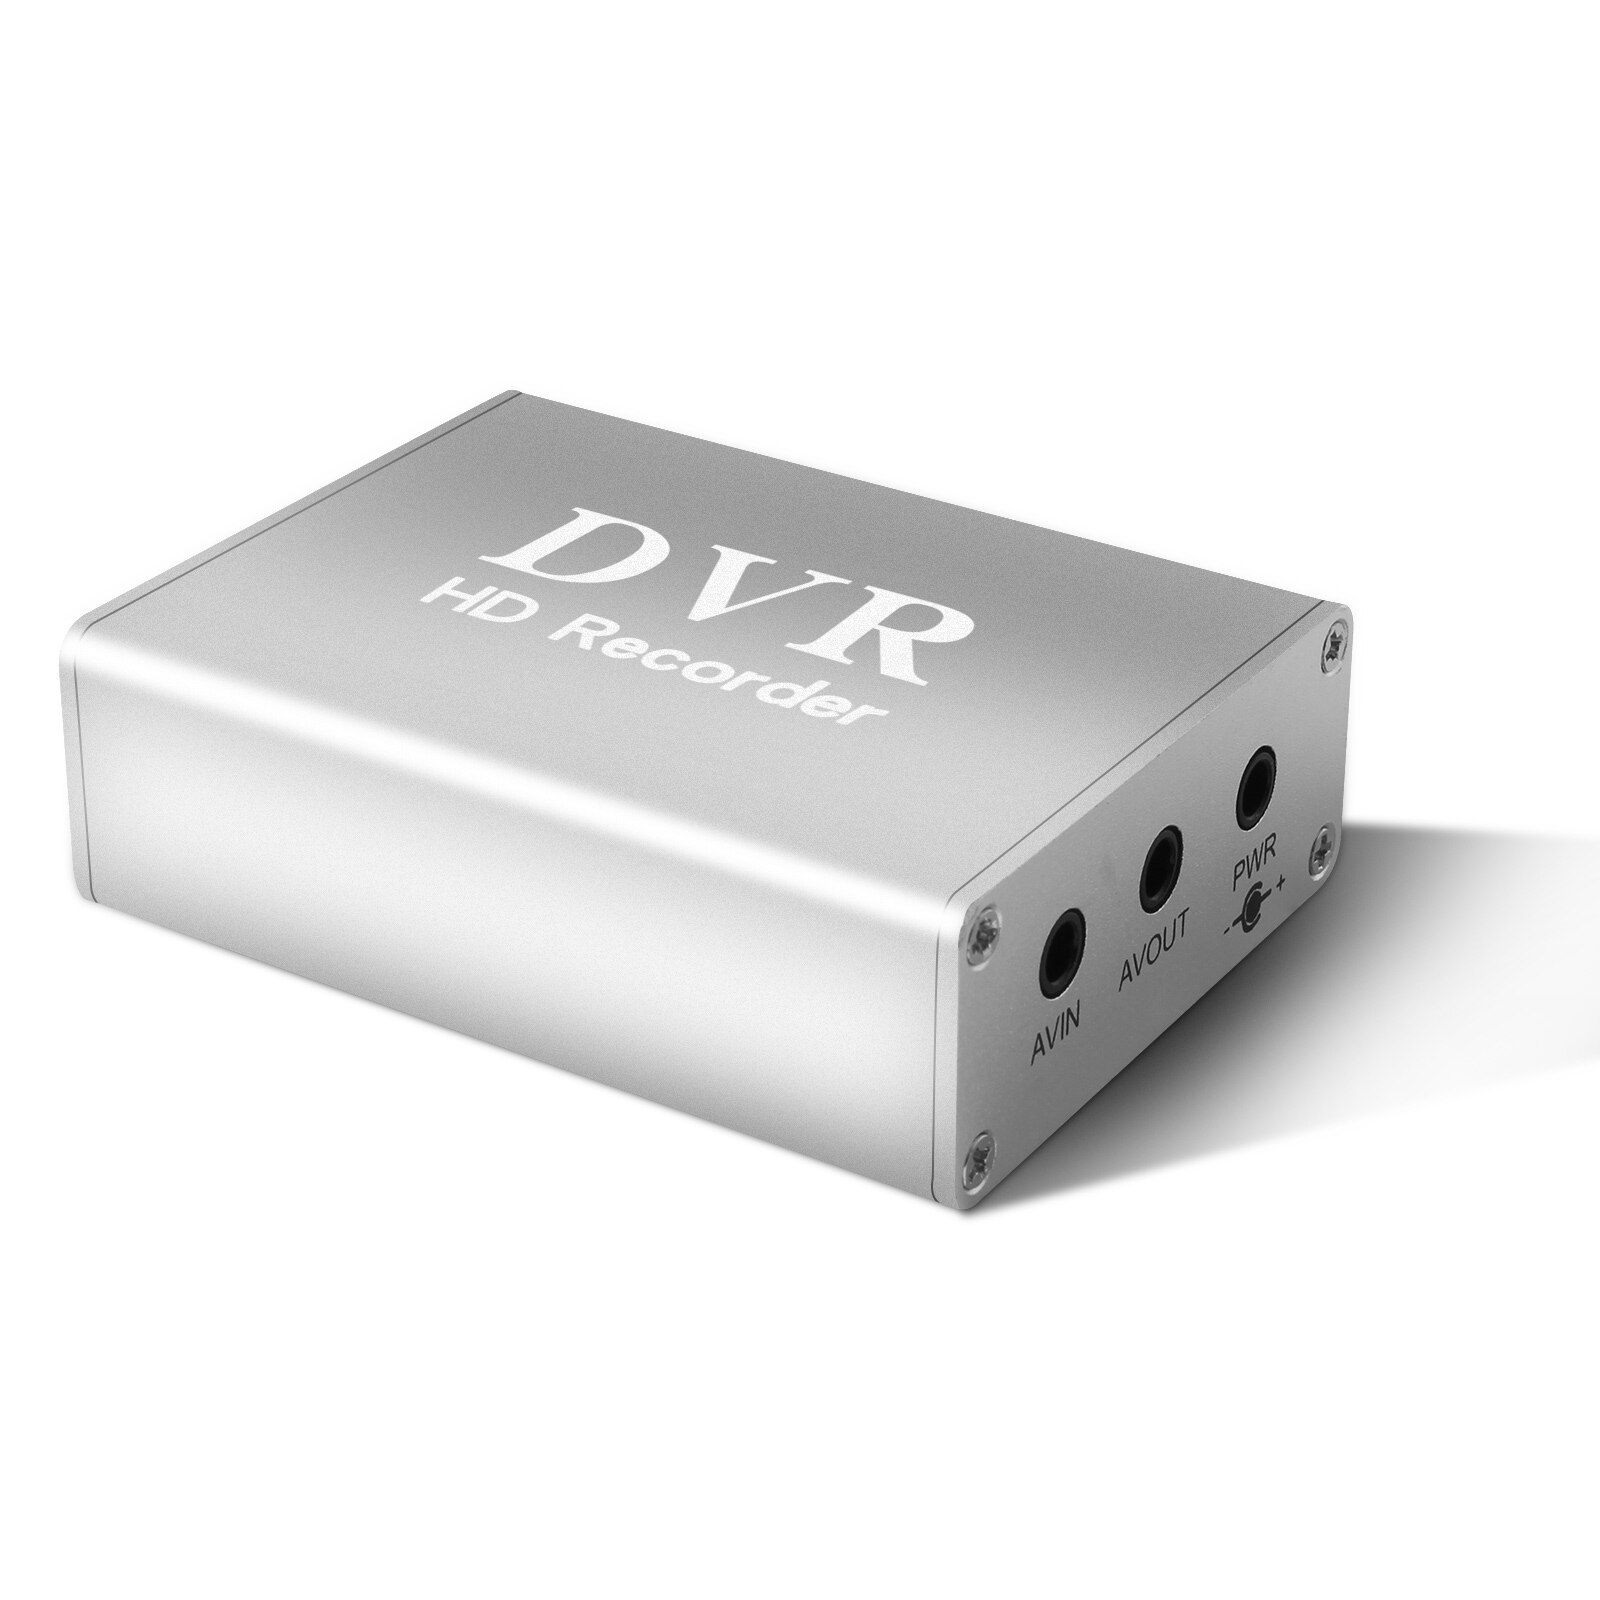 (image for) Mini DVR support sd card Real-time xbox hd mini 1ch dvr